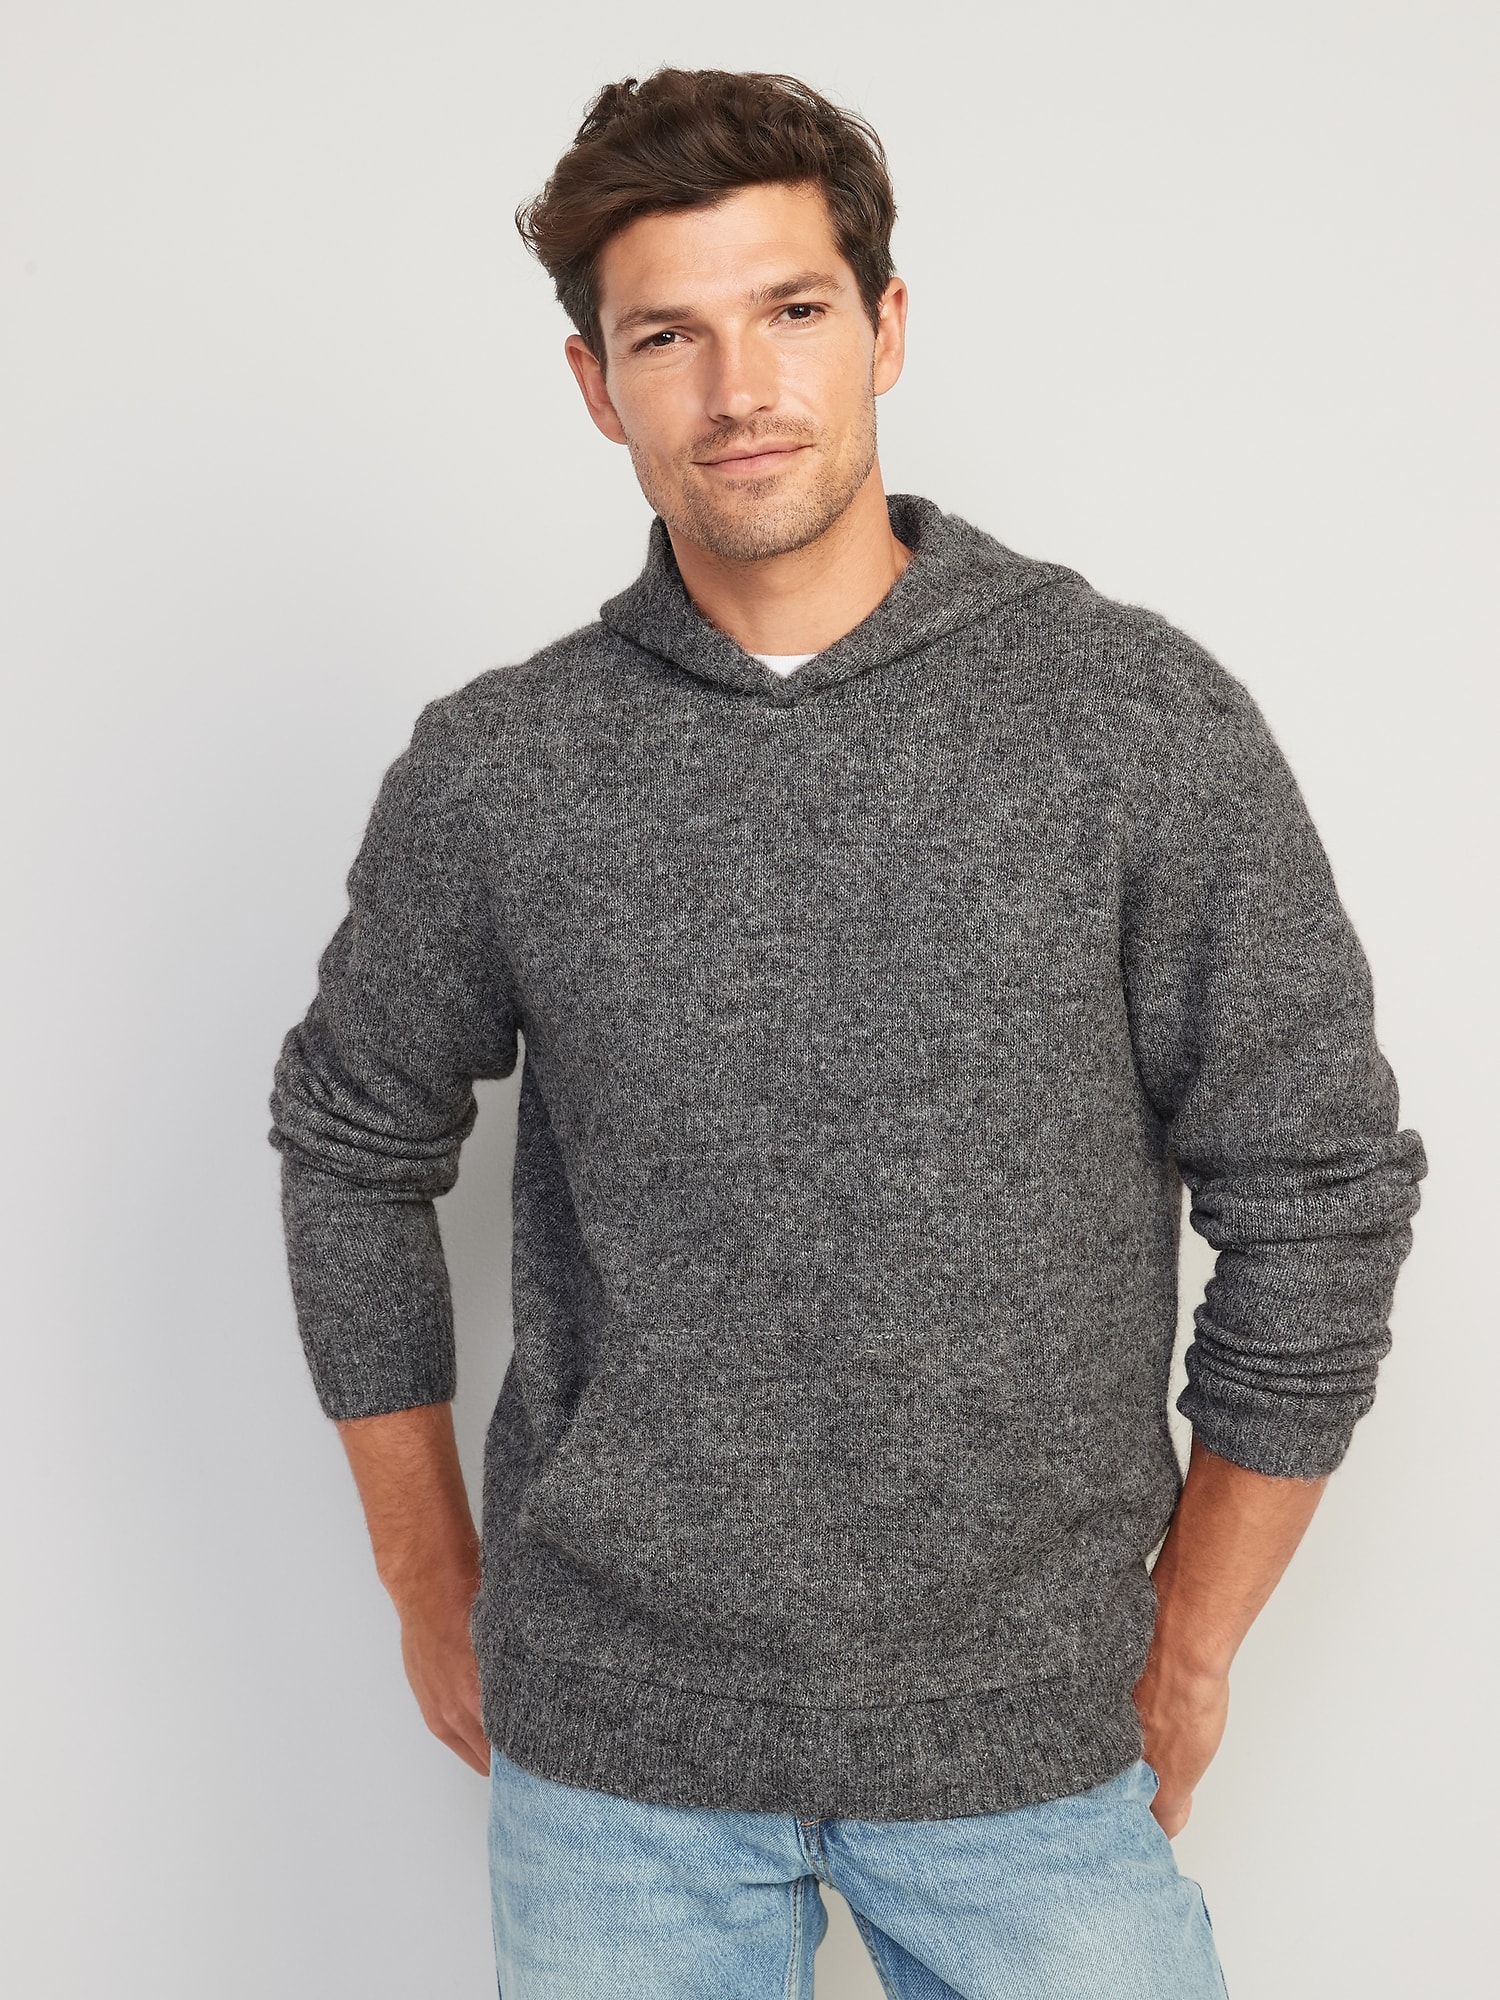 Loose-Fit Pullover Hoodie Men | Navy Sweater for Old